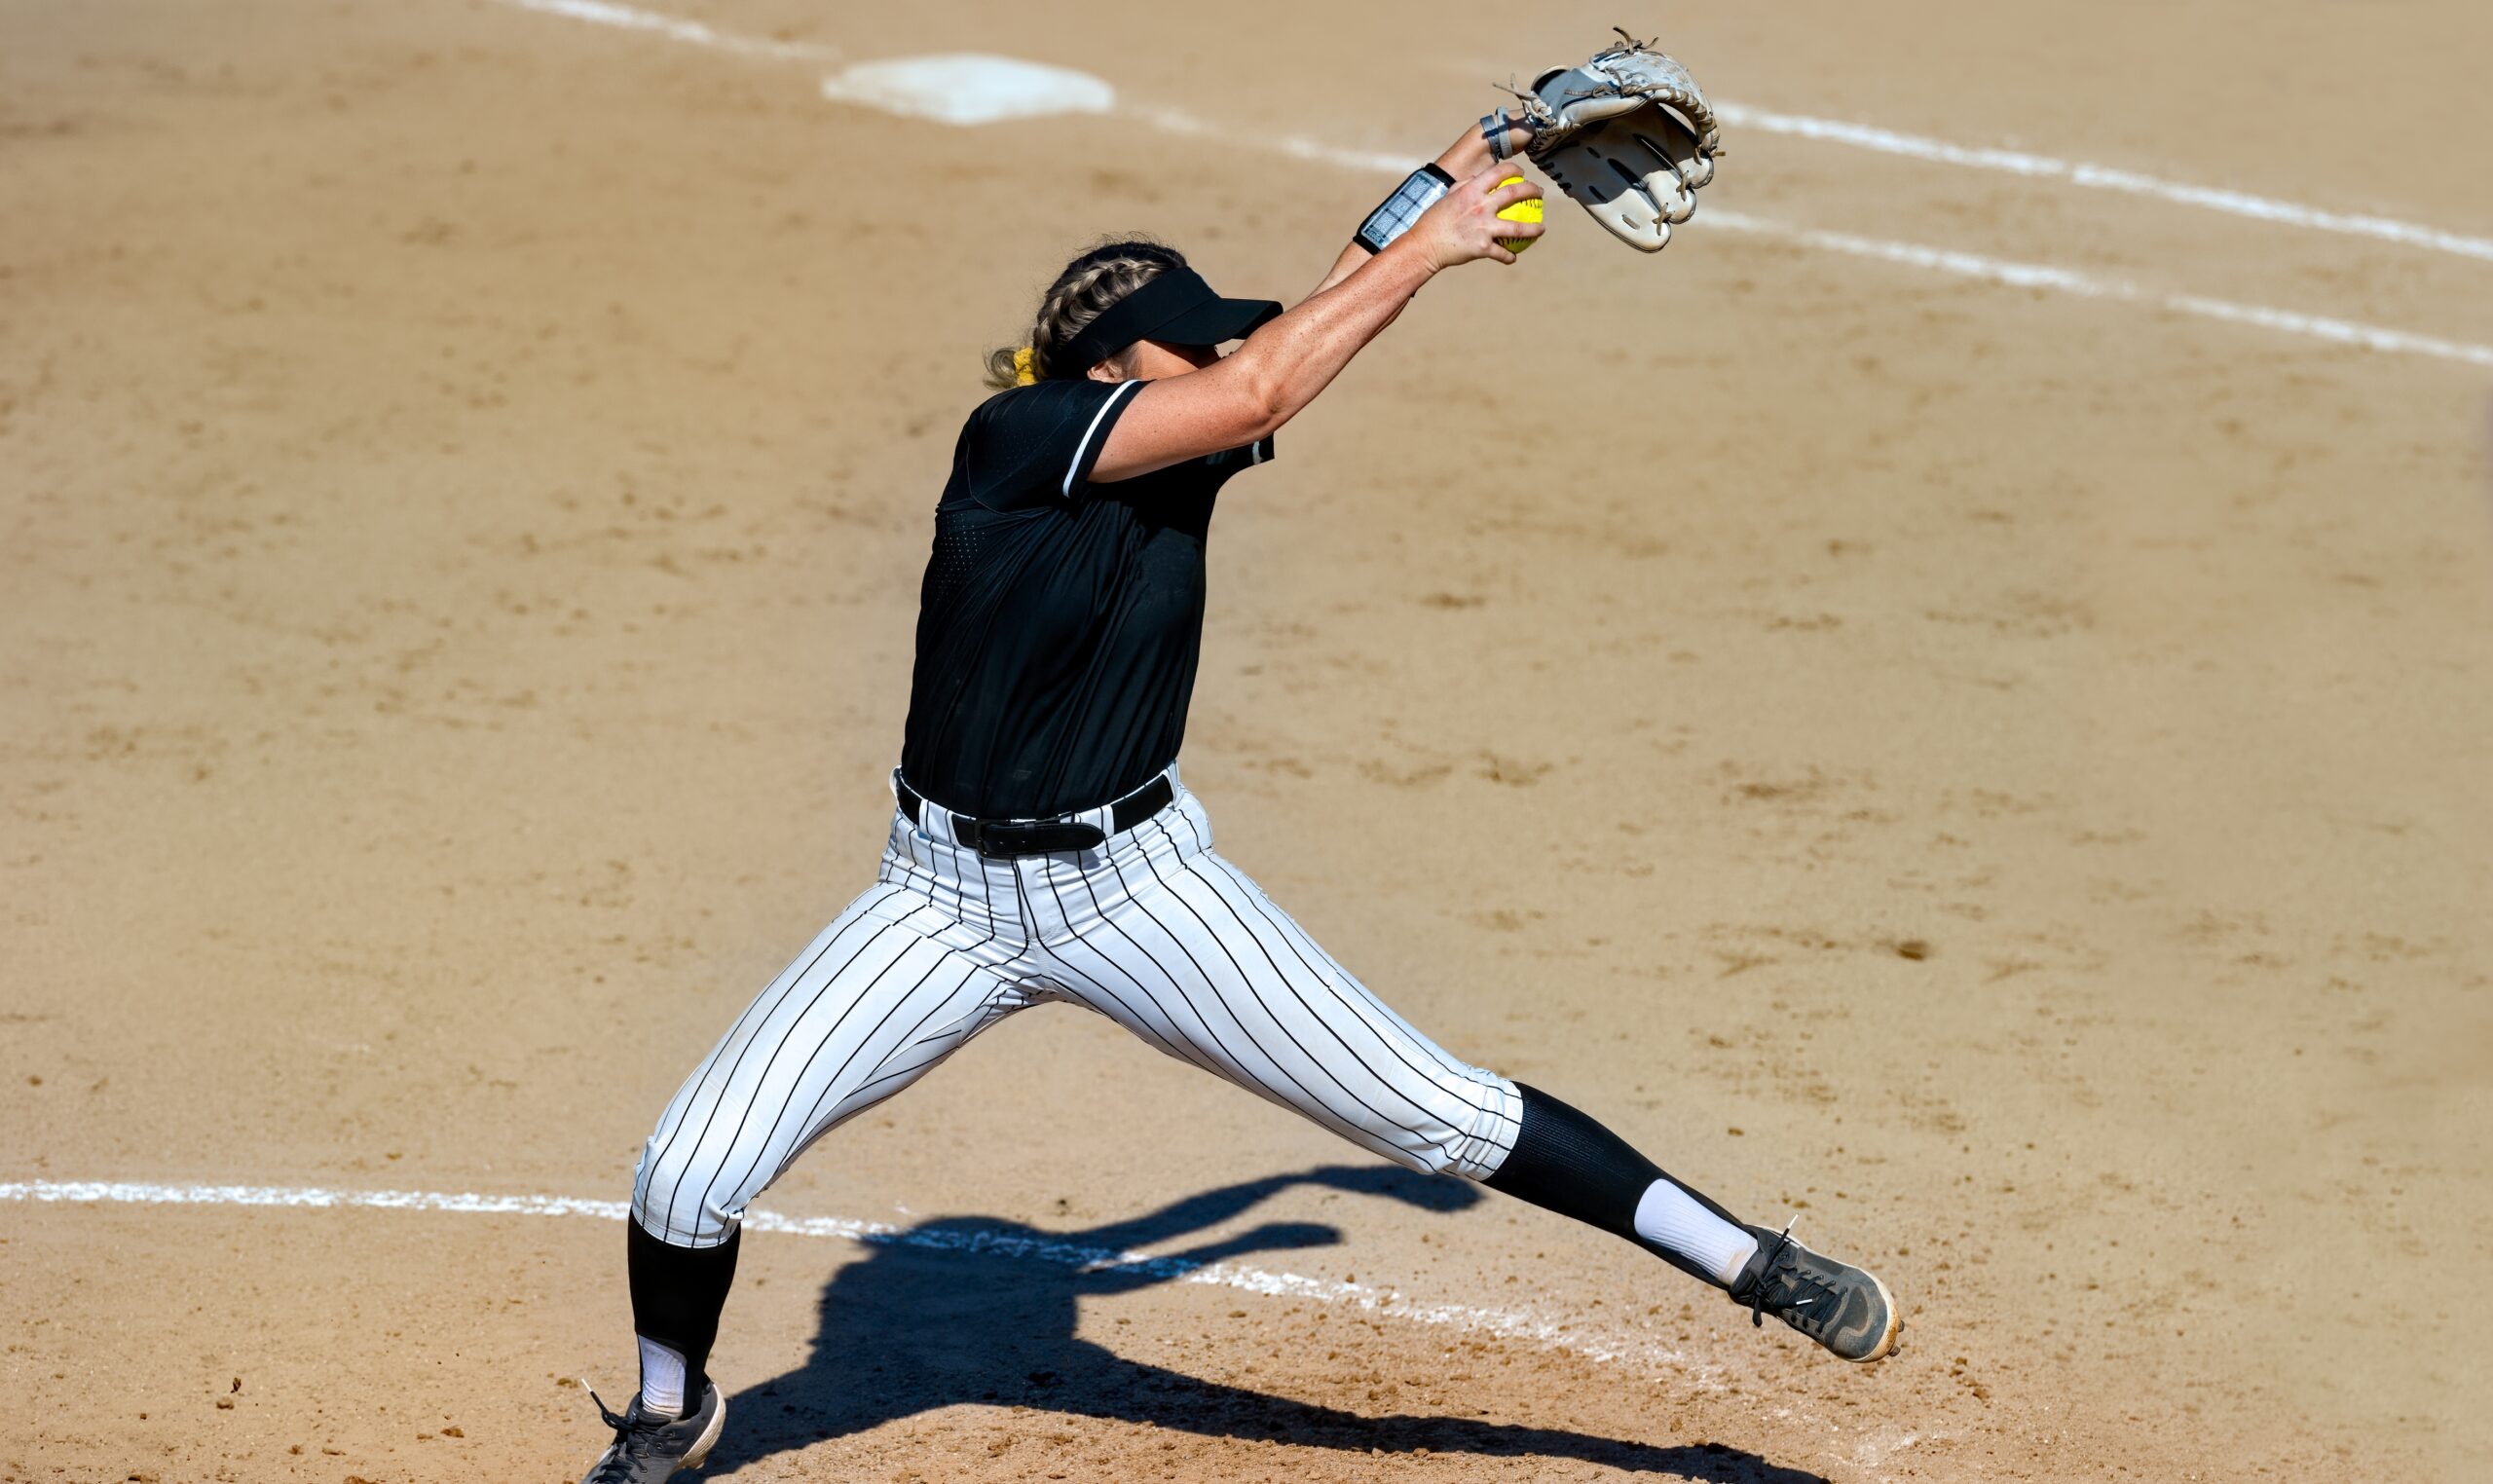 A college sports softball pitcher winds up to throw the ball to the batter. 